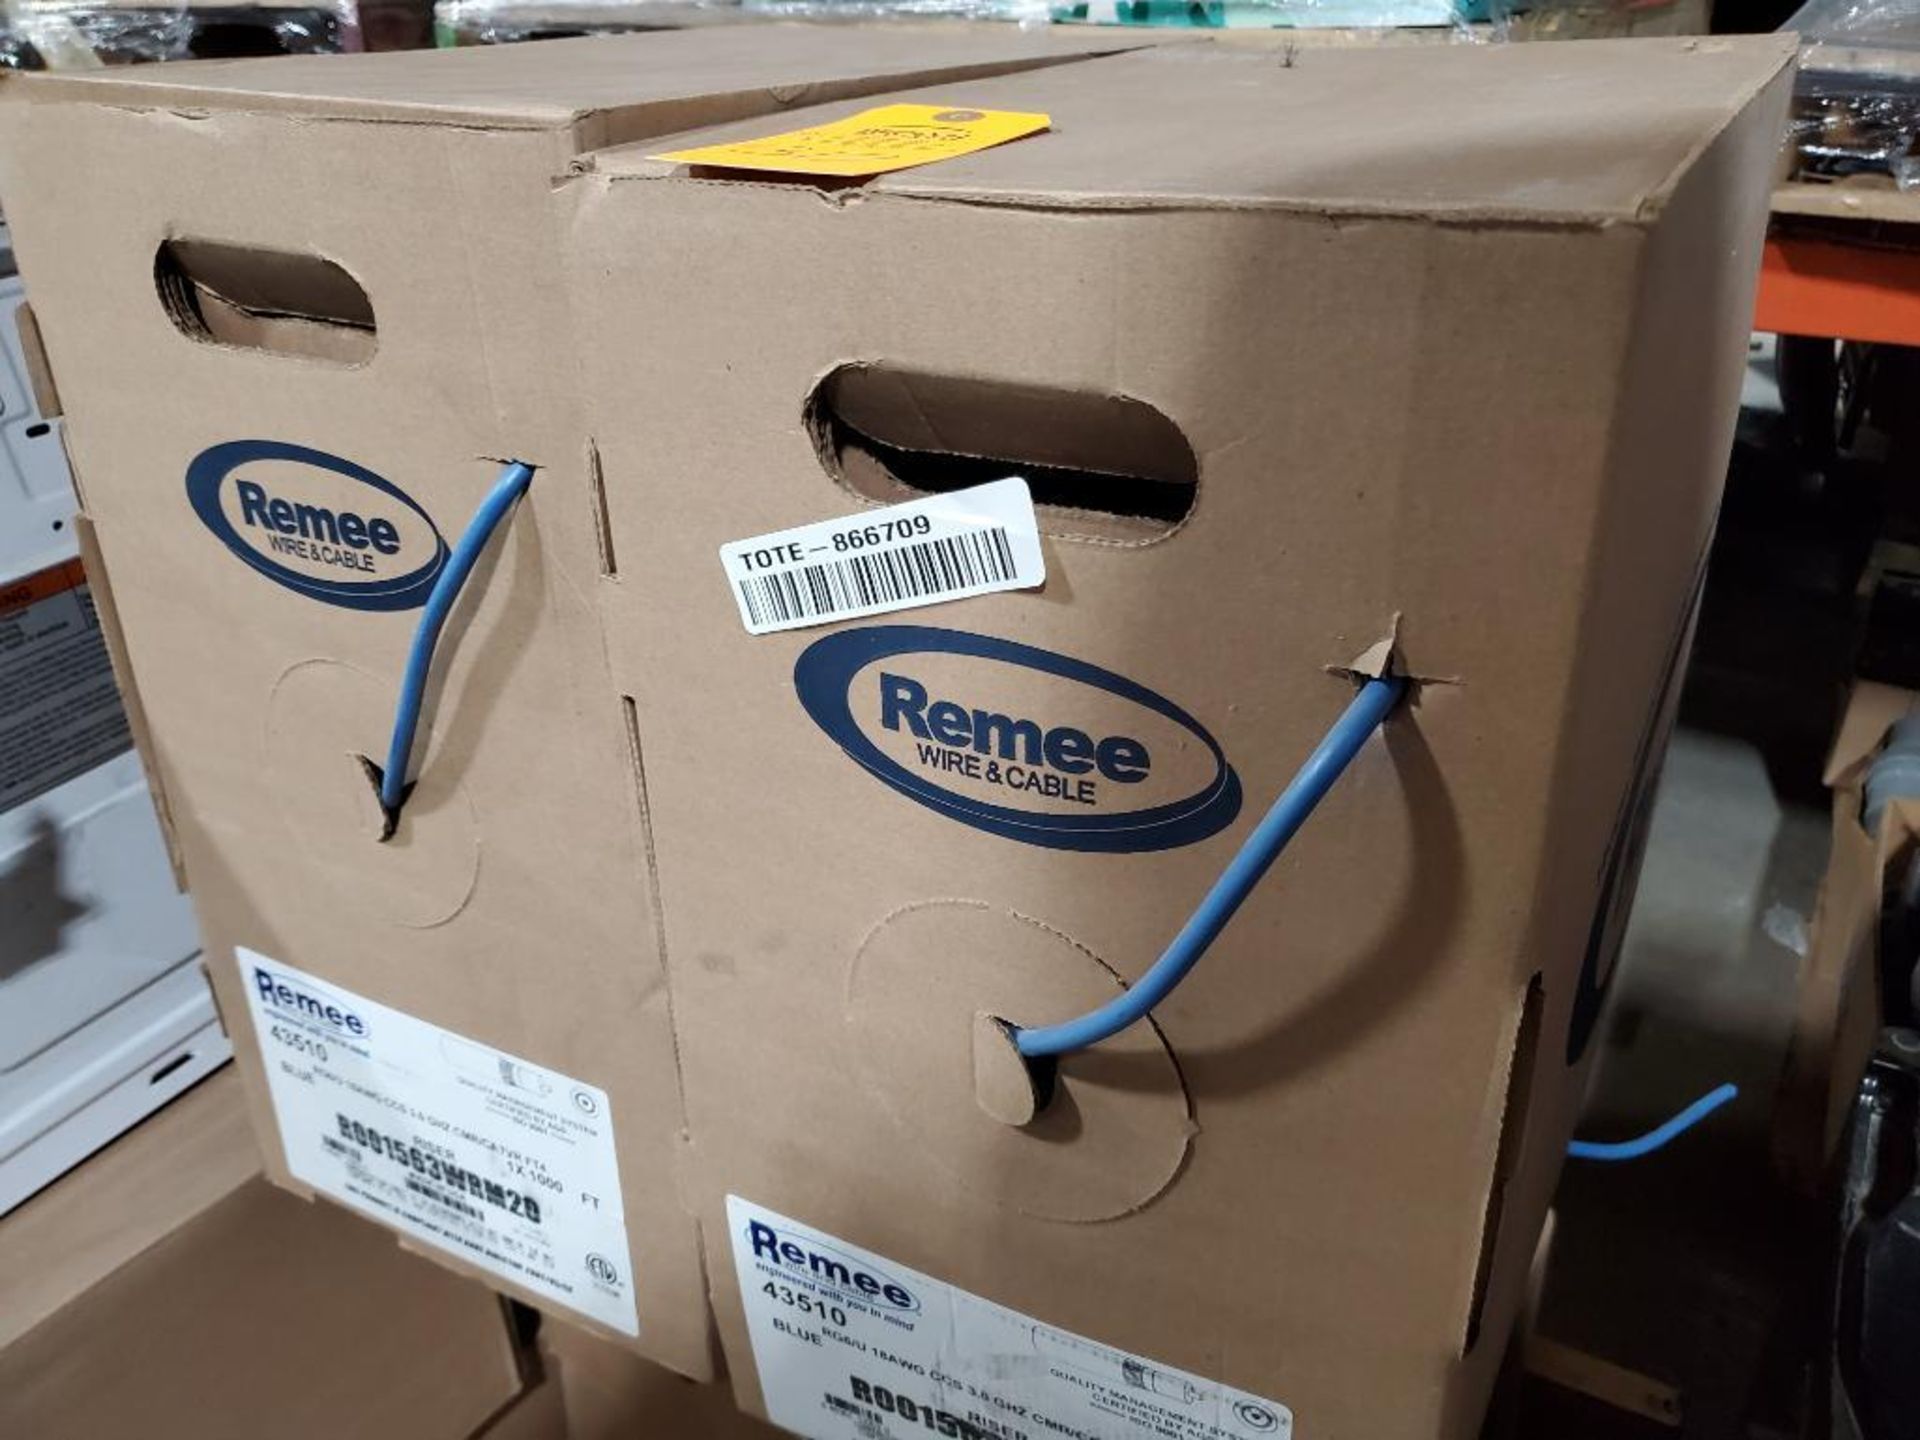 Qty 2 - Boxes of Remee wire and cable coaxial. - Image 3 of 3